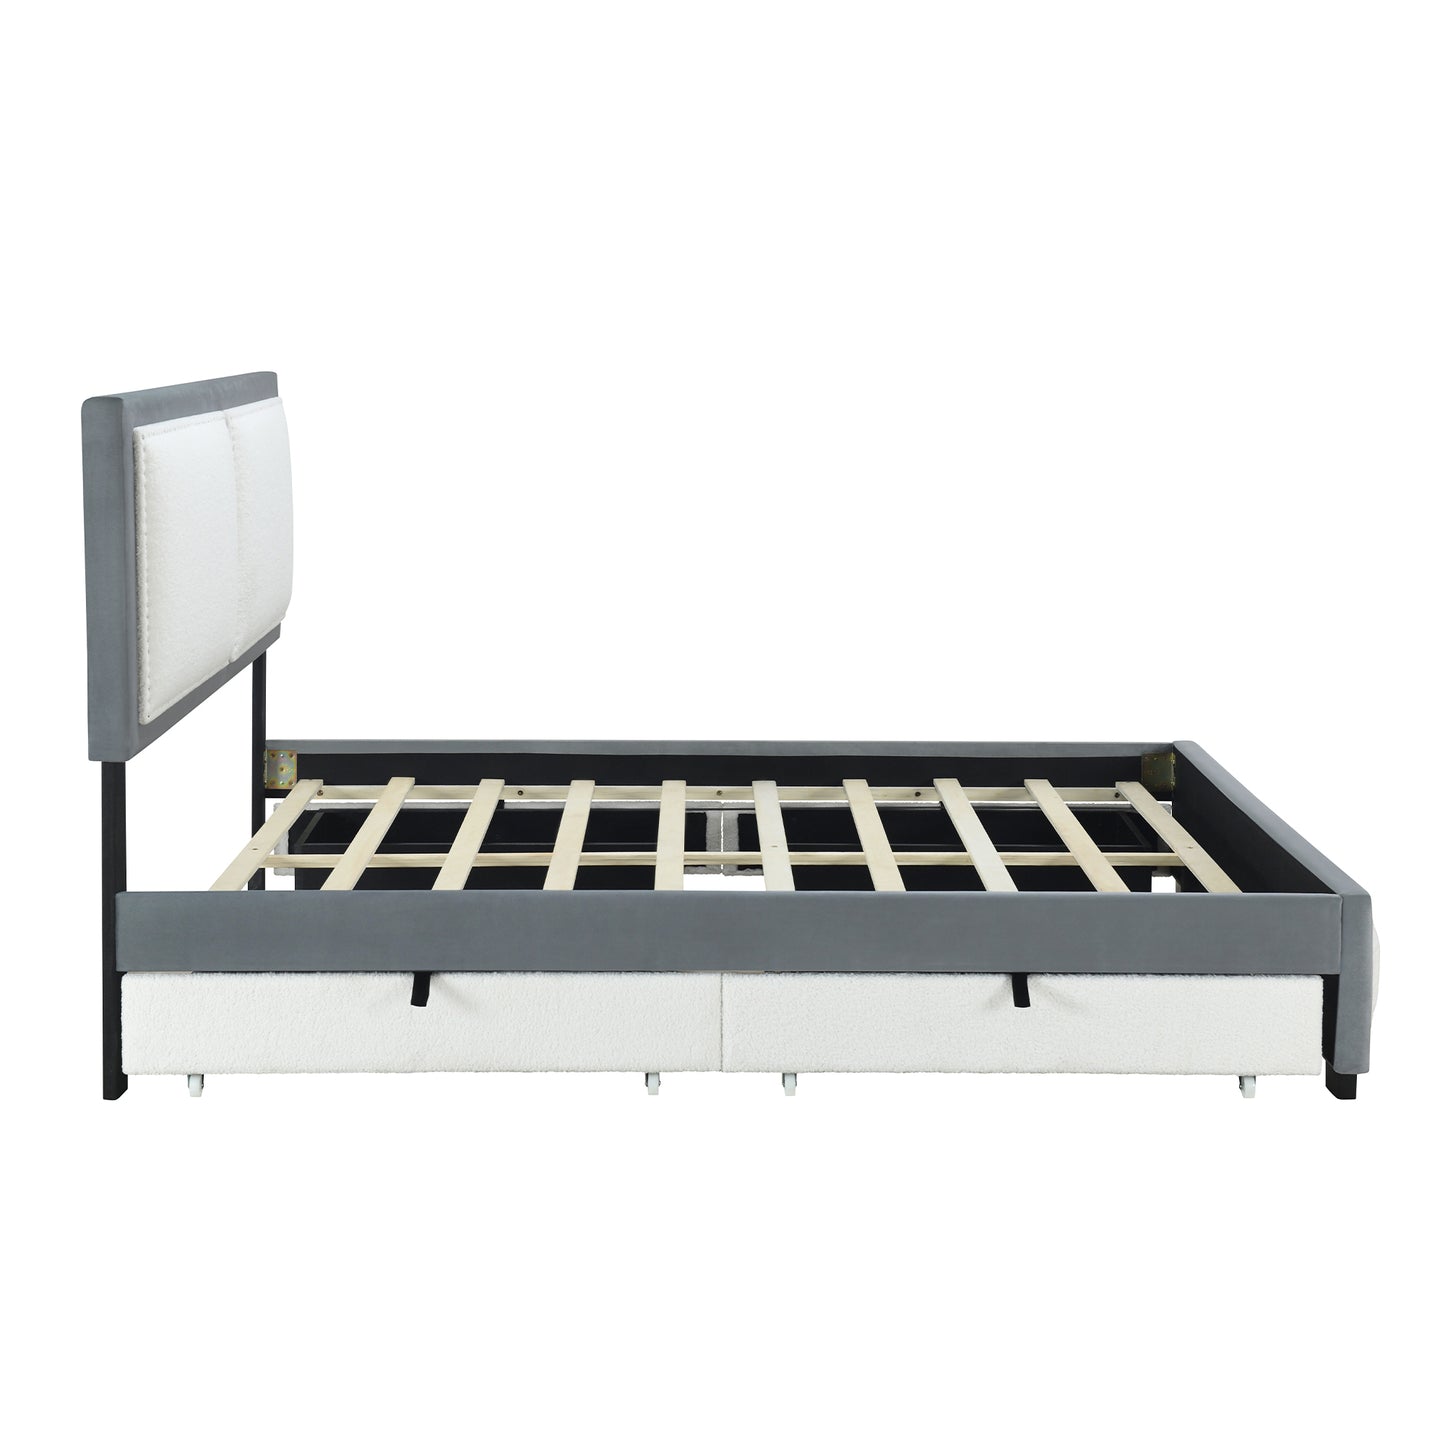 Queen Size Upholstered Platform Bed with Large Rivet-decorated Backrests and 4 Drawers, Velvet matched with Teddy Fleece, Gray+White